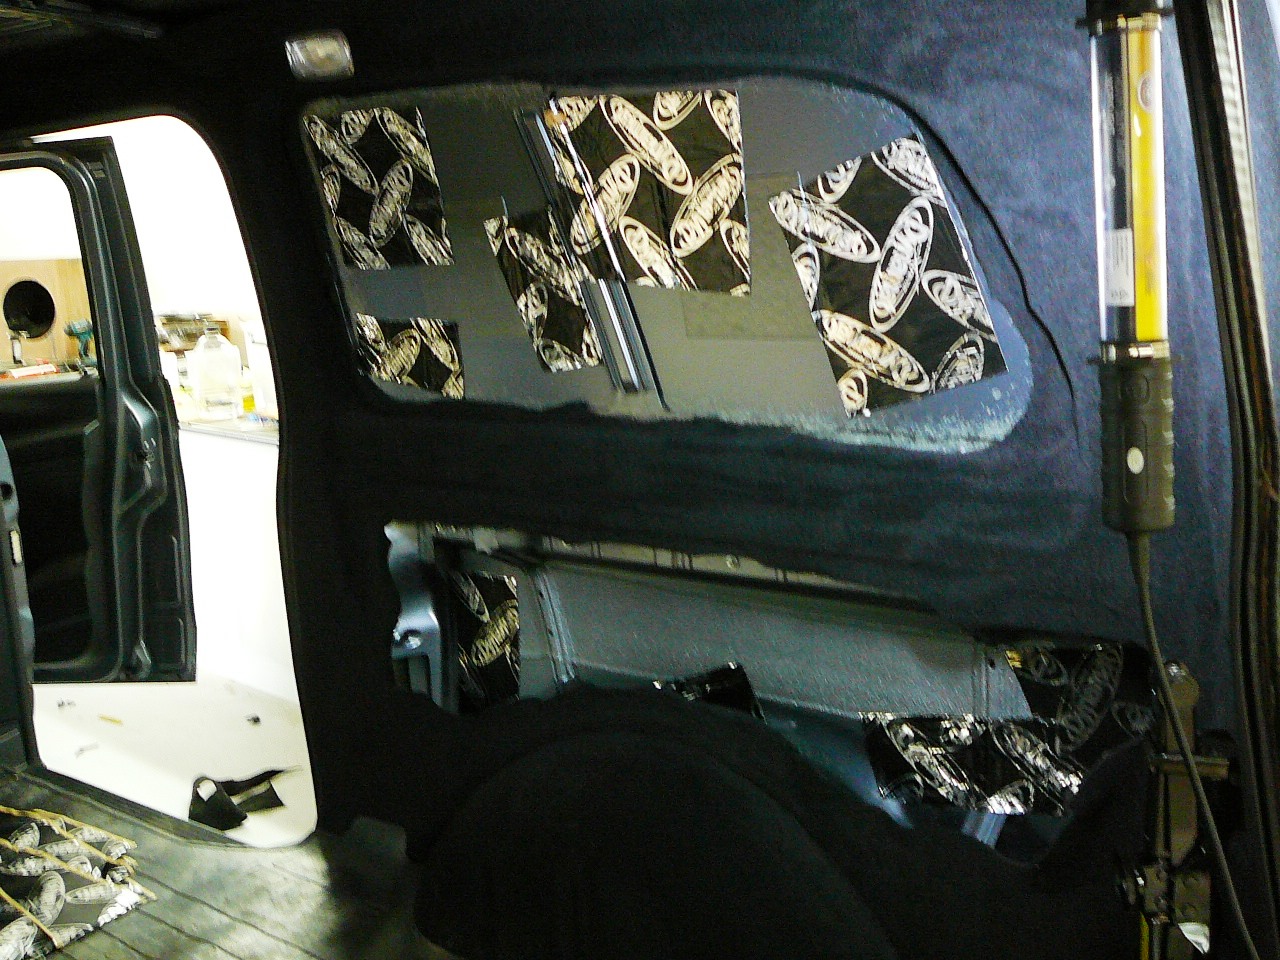 Mercedes Benz Vito 2015, Custom Sub Box, Rear Side Walls and Roof Panels with Dynamat Sound Proofing